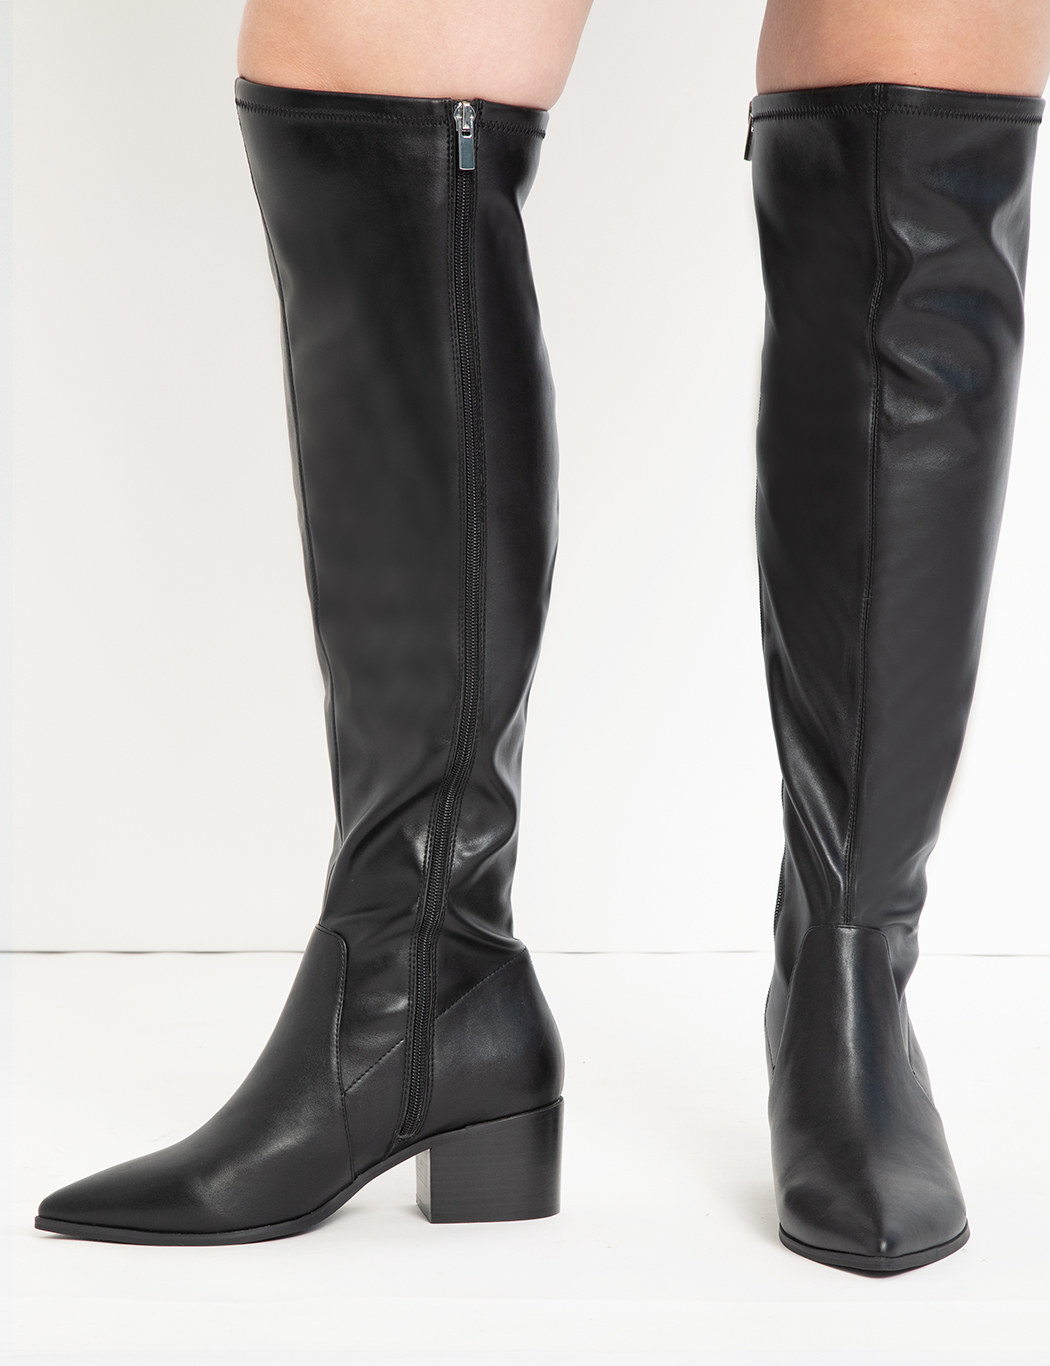 33 Basic Boots You Can Hypothetically Wear Forever And Ever